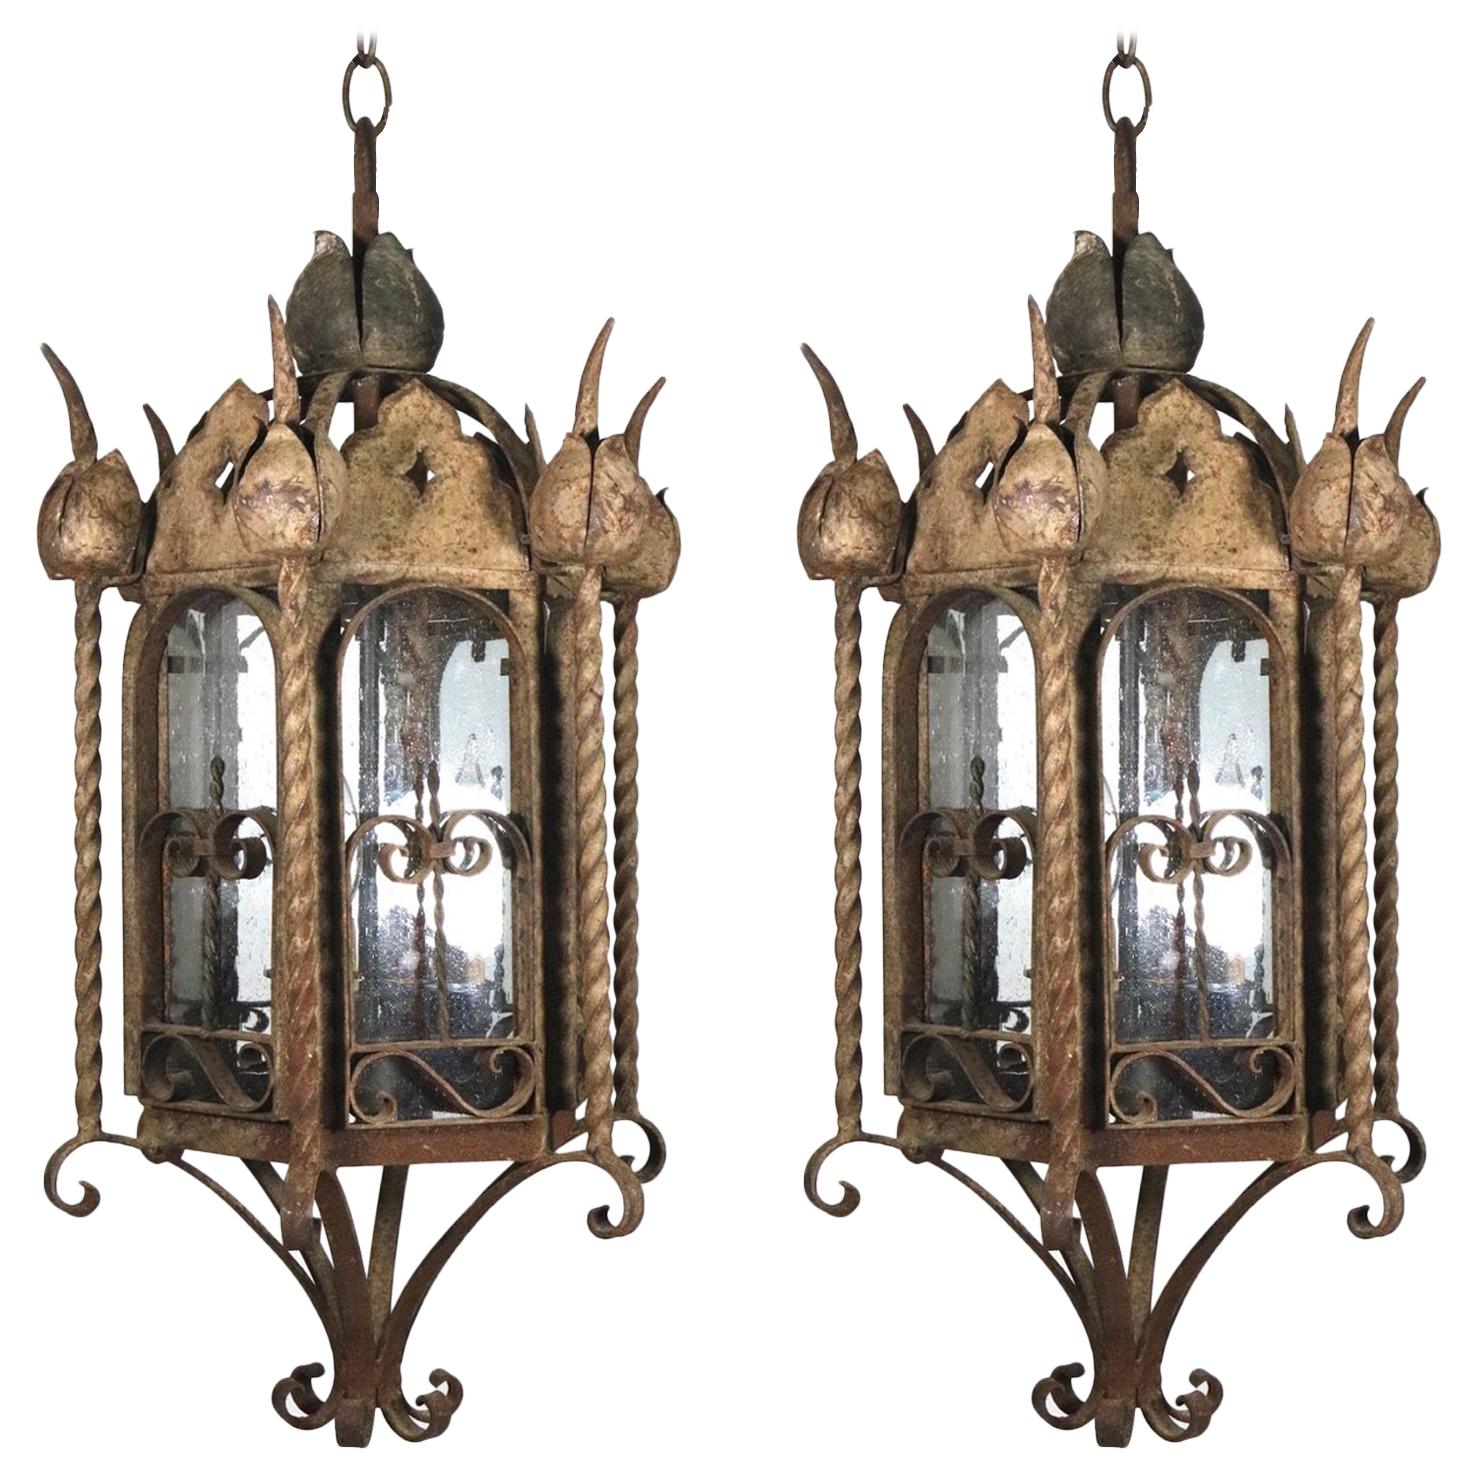 Mizner Outdoor Pair Seed Glass Iron Lanterns-Rusticated Finish-circa 1900s For Sale